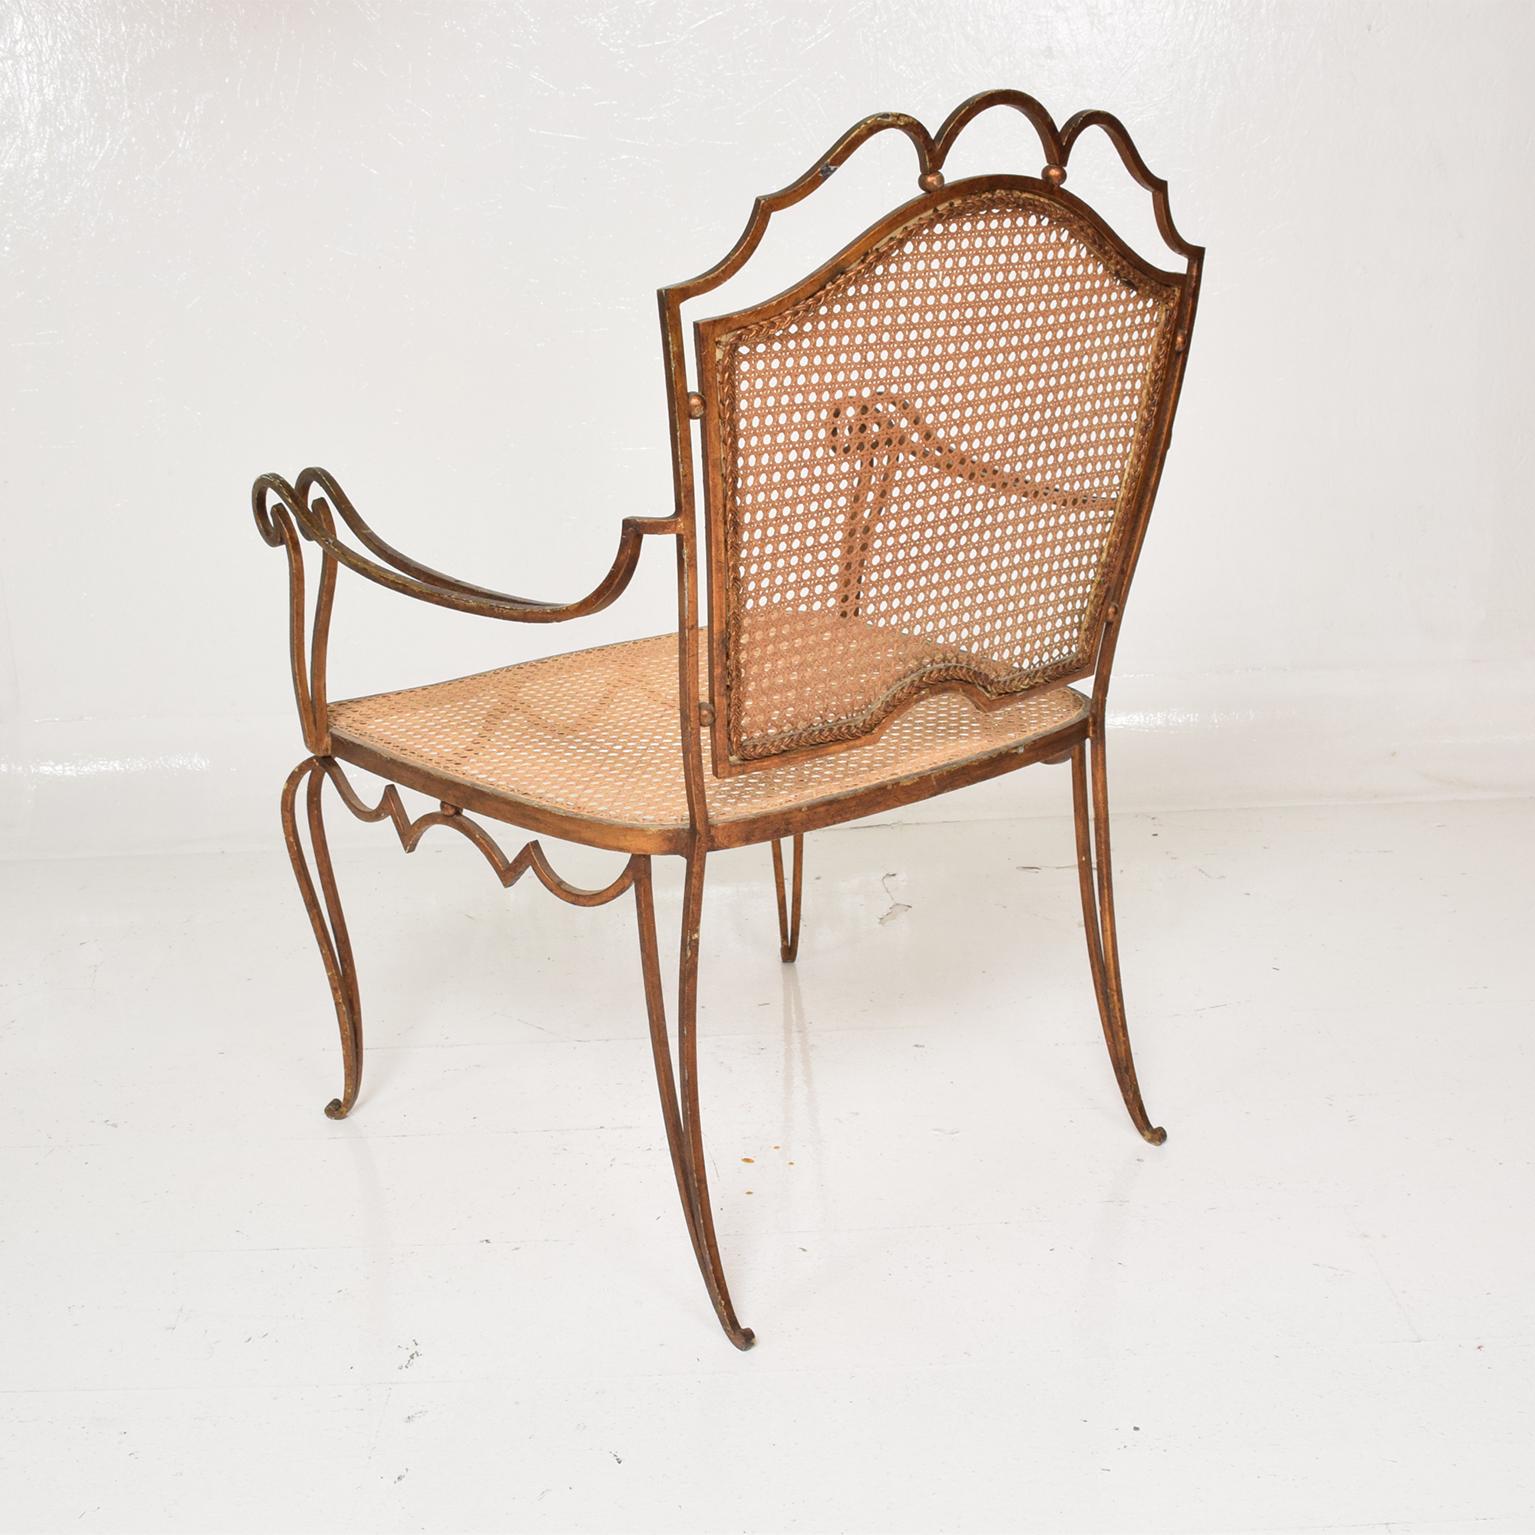 Fanciful Regency Armchair by Arturo Pani in Forged Gilt Iron & Woven Cane 1940s 1